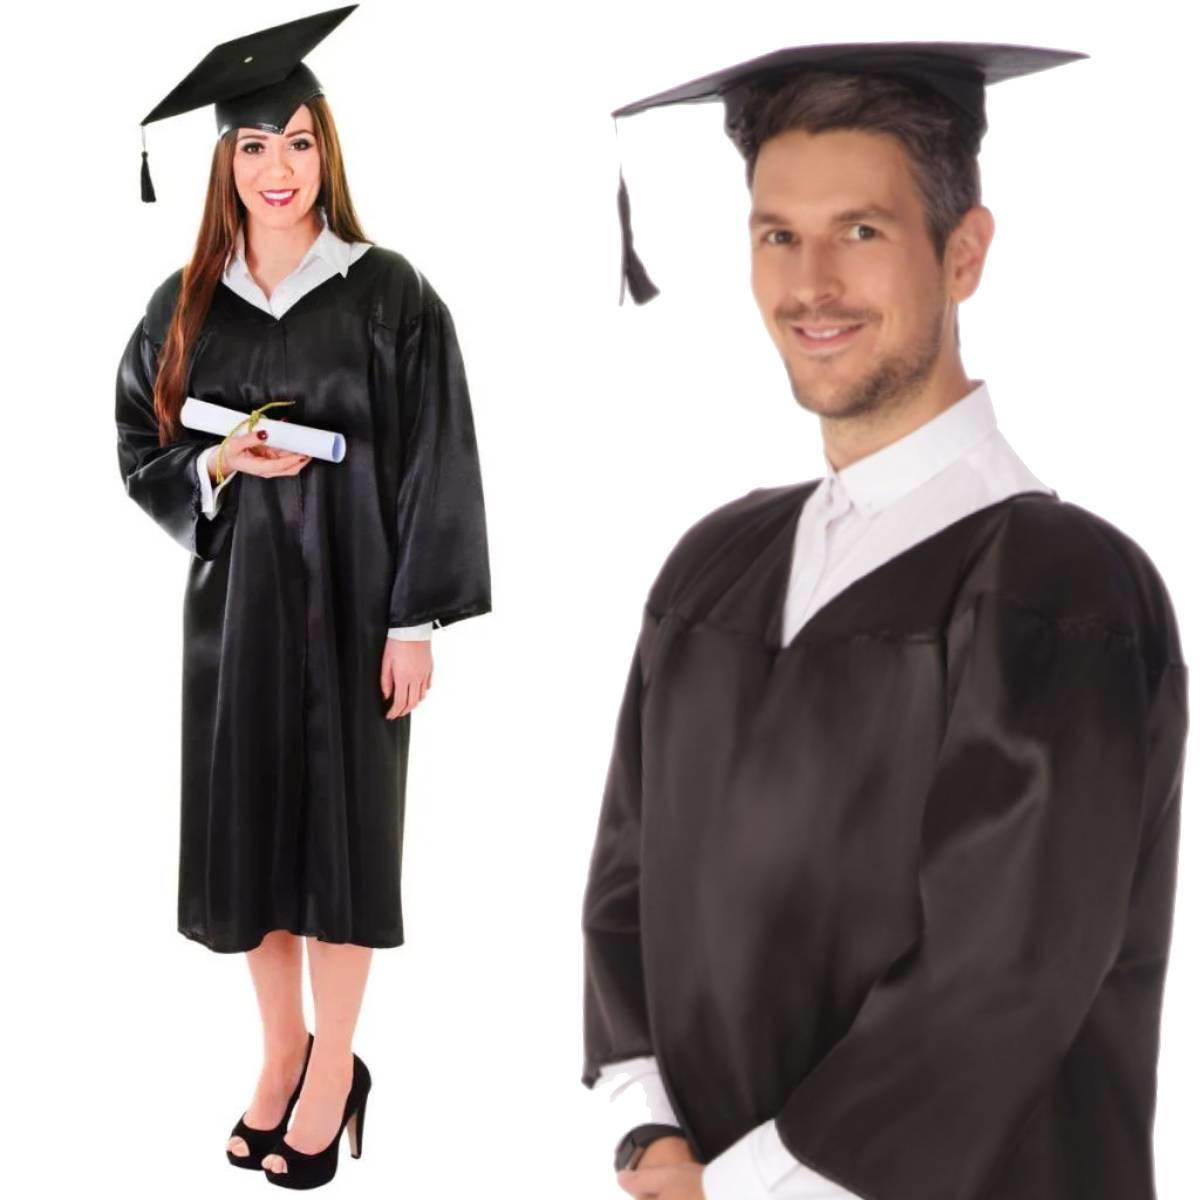 Unisex Graduation Robe costume including Mortar Board by Bristol Novelties AC396 available here at Karnival Costumes online party shop